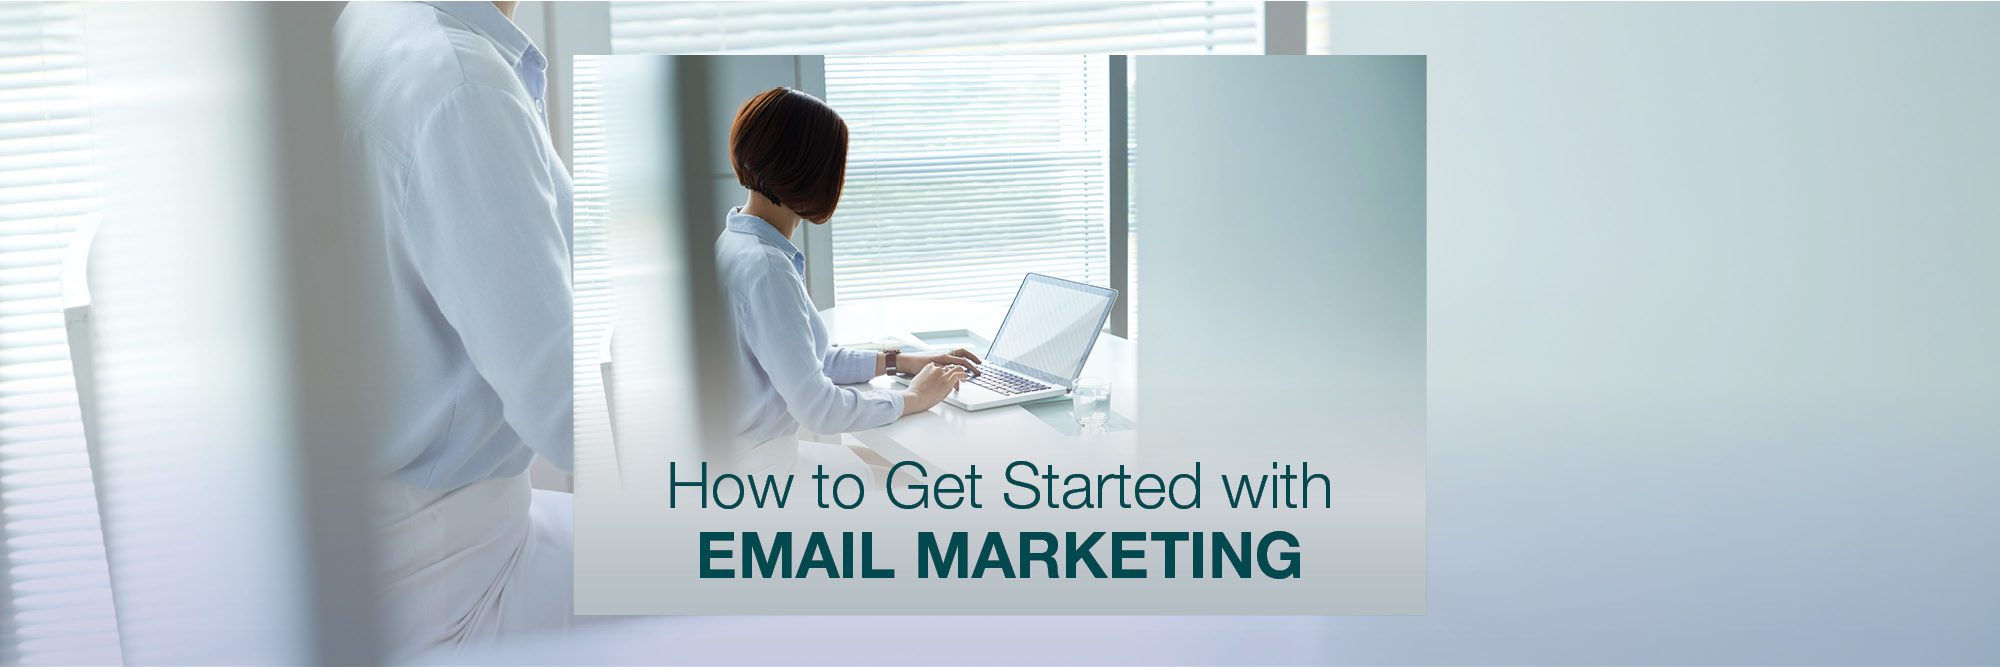 How To Get Started with Email Marketing: Five Steps for MSPs